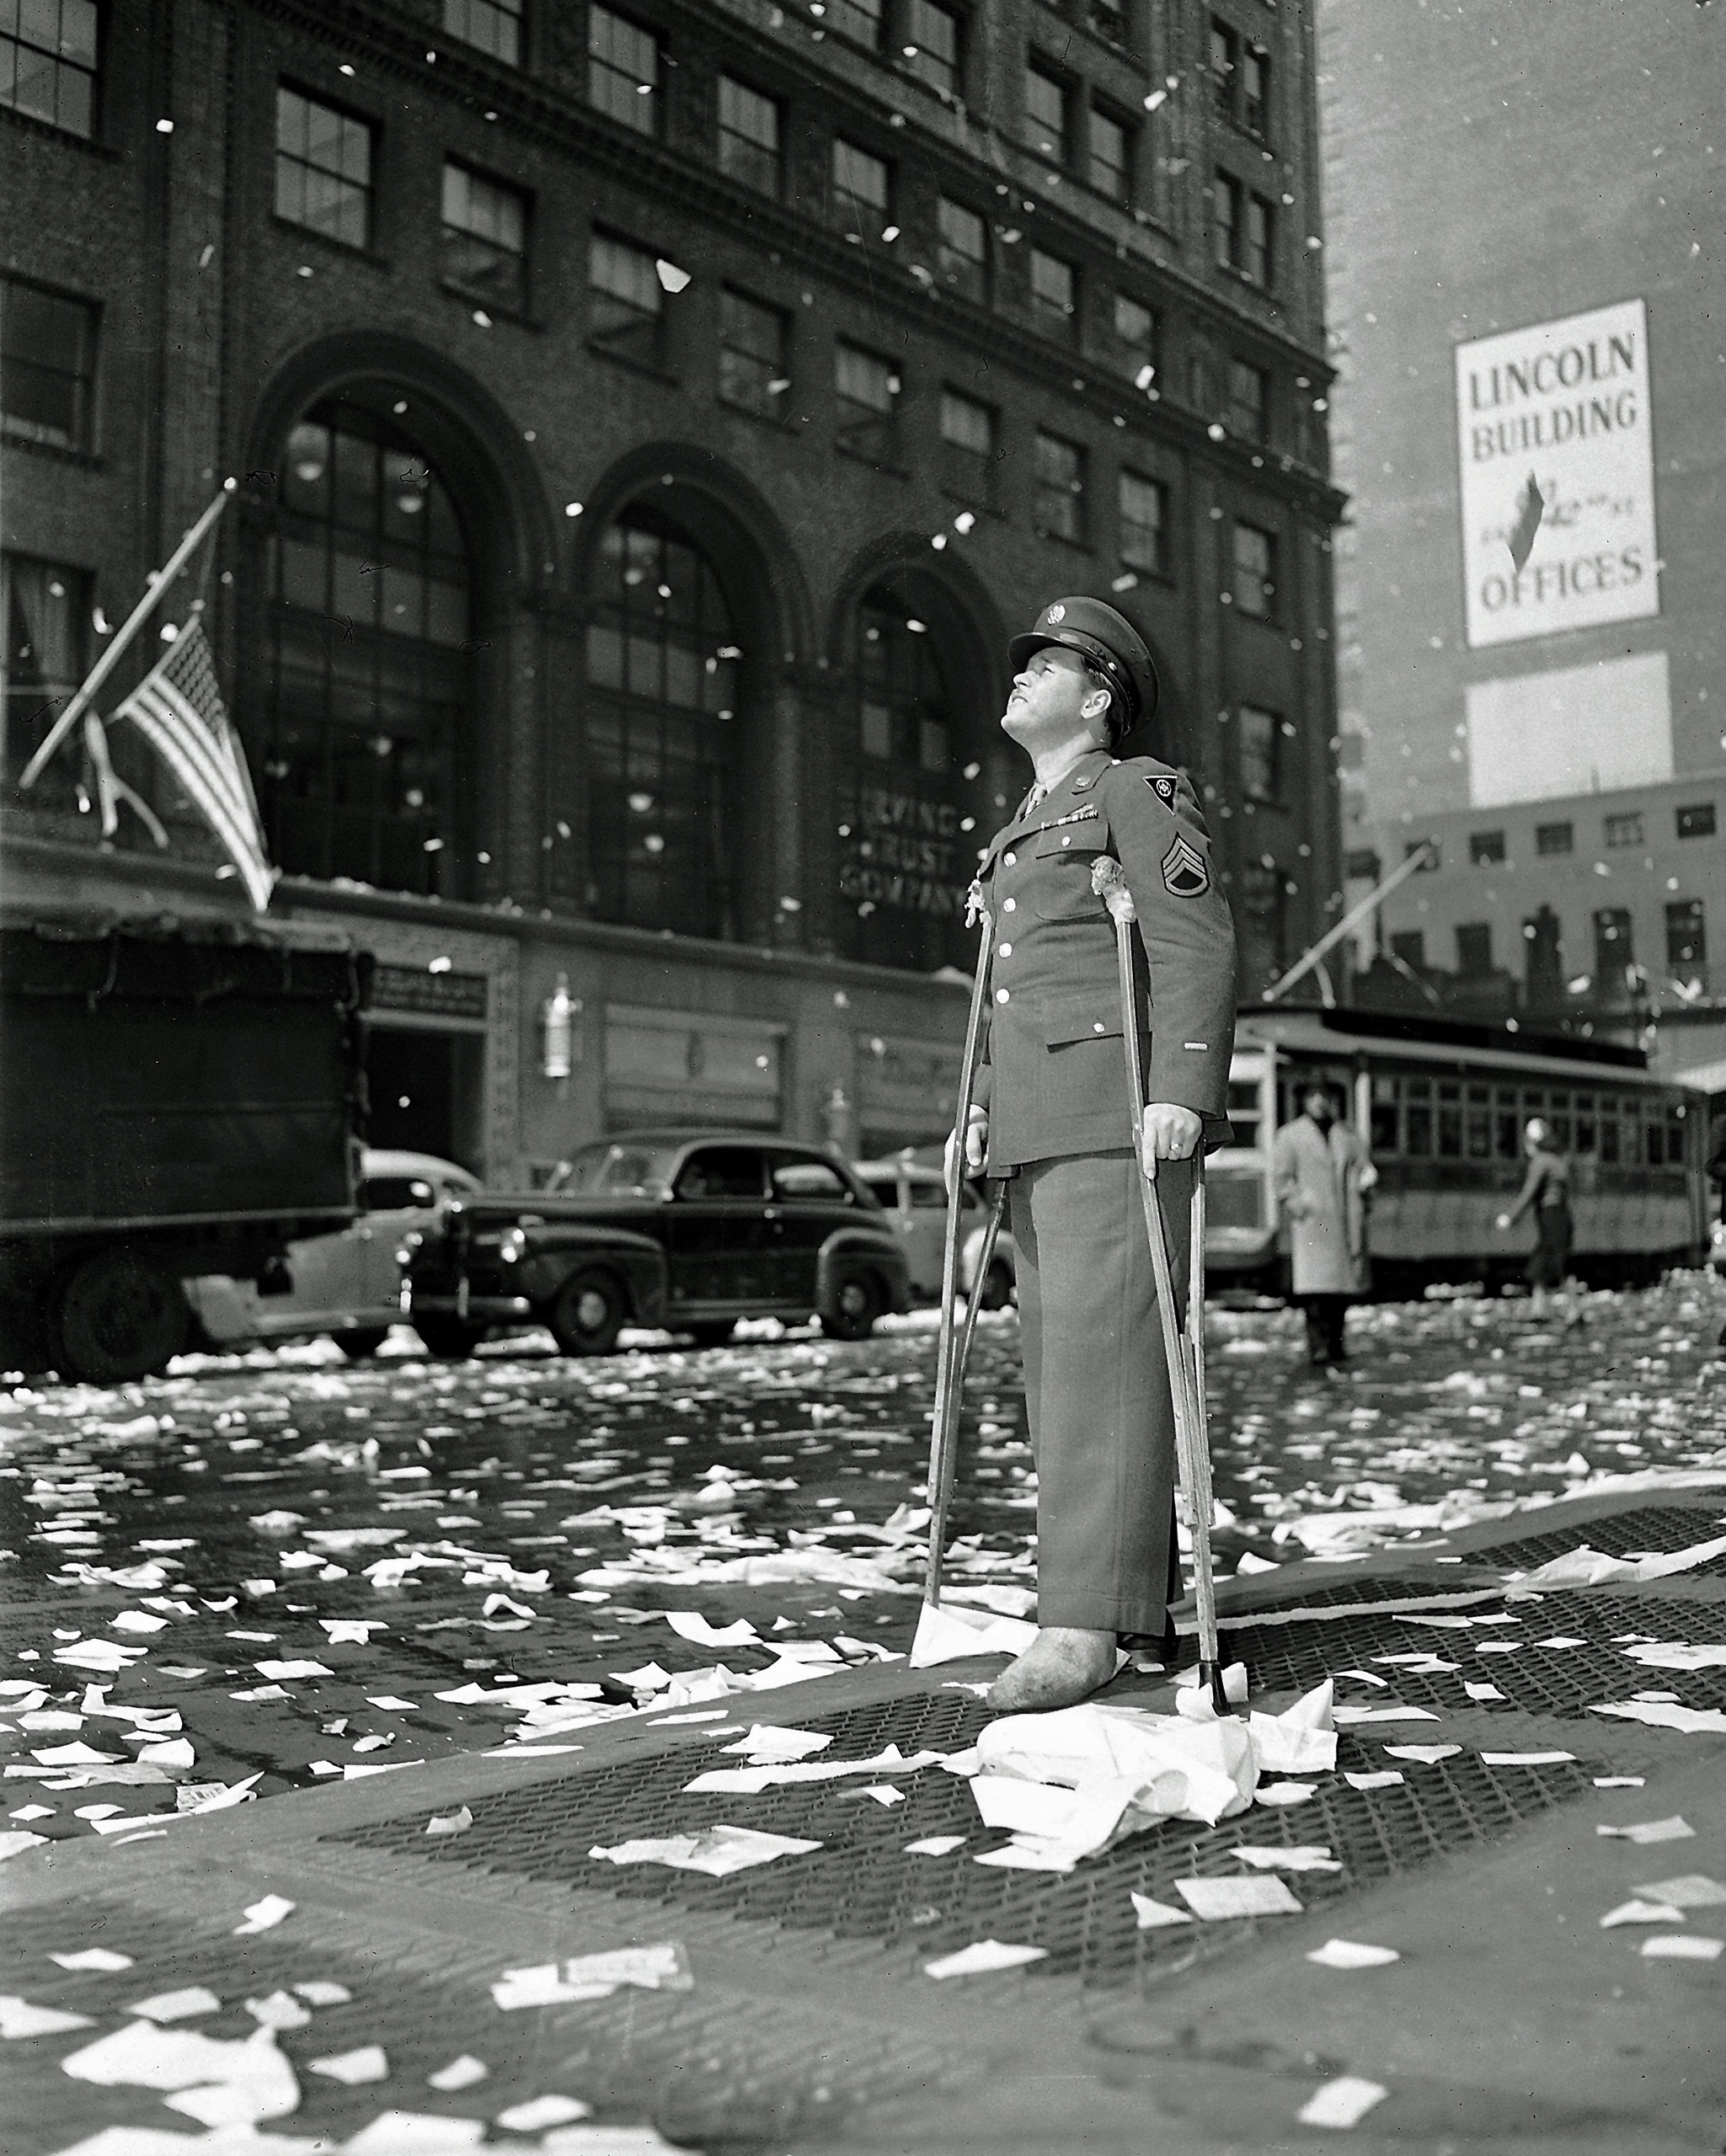 Staff Sgt. Arthur Moore of Buffalo, N.Y., who was wounded in Belgium, stands on 42nd Street near Grand Central Station in New York Monday, May 7, 1945 as New Yorkers celebrate news of VE Day, victory over Nazi Germany. (AP Photo)